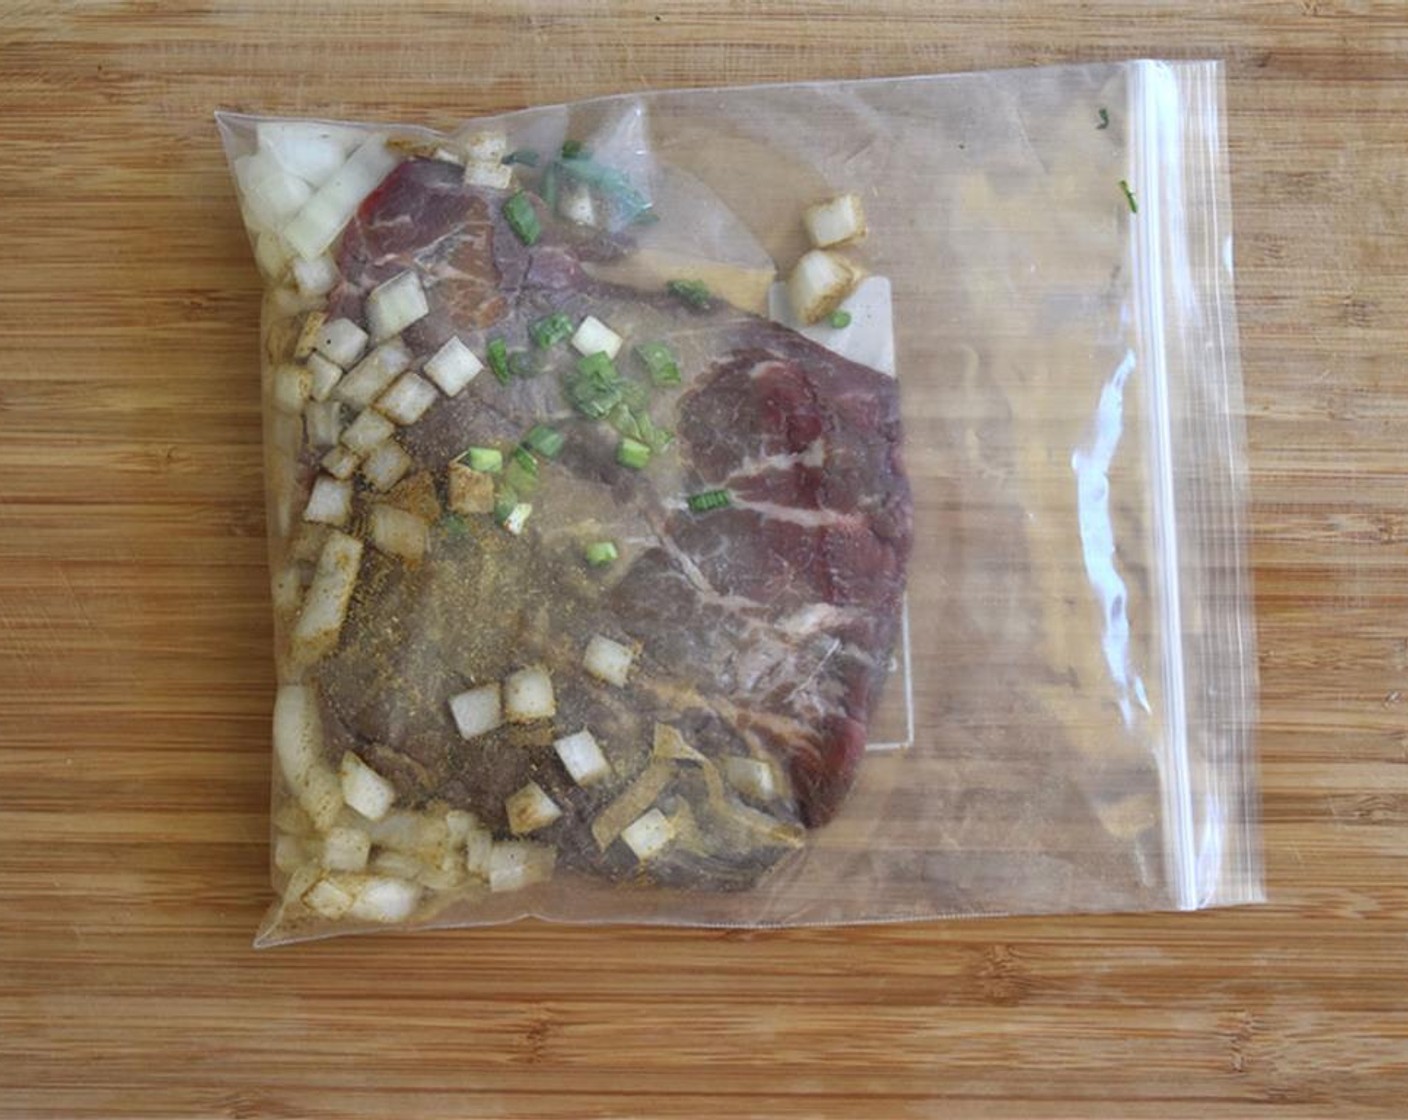 step 5 Place Flank Steak (1 lb) in a plastic bag with Garlic (2 cloves), Scallions (2), Onion (1), Ground Cumin (1/4 tsp), Salt (1 pinch), and Ground Black Pepper (1 pinch) in a bag. Let marinate in fridge for 3 hours.